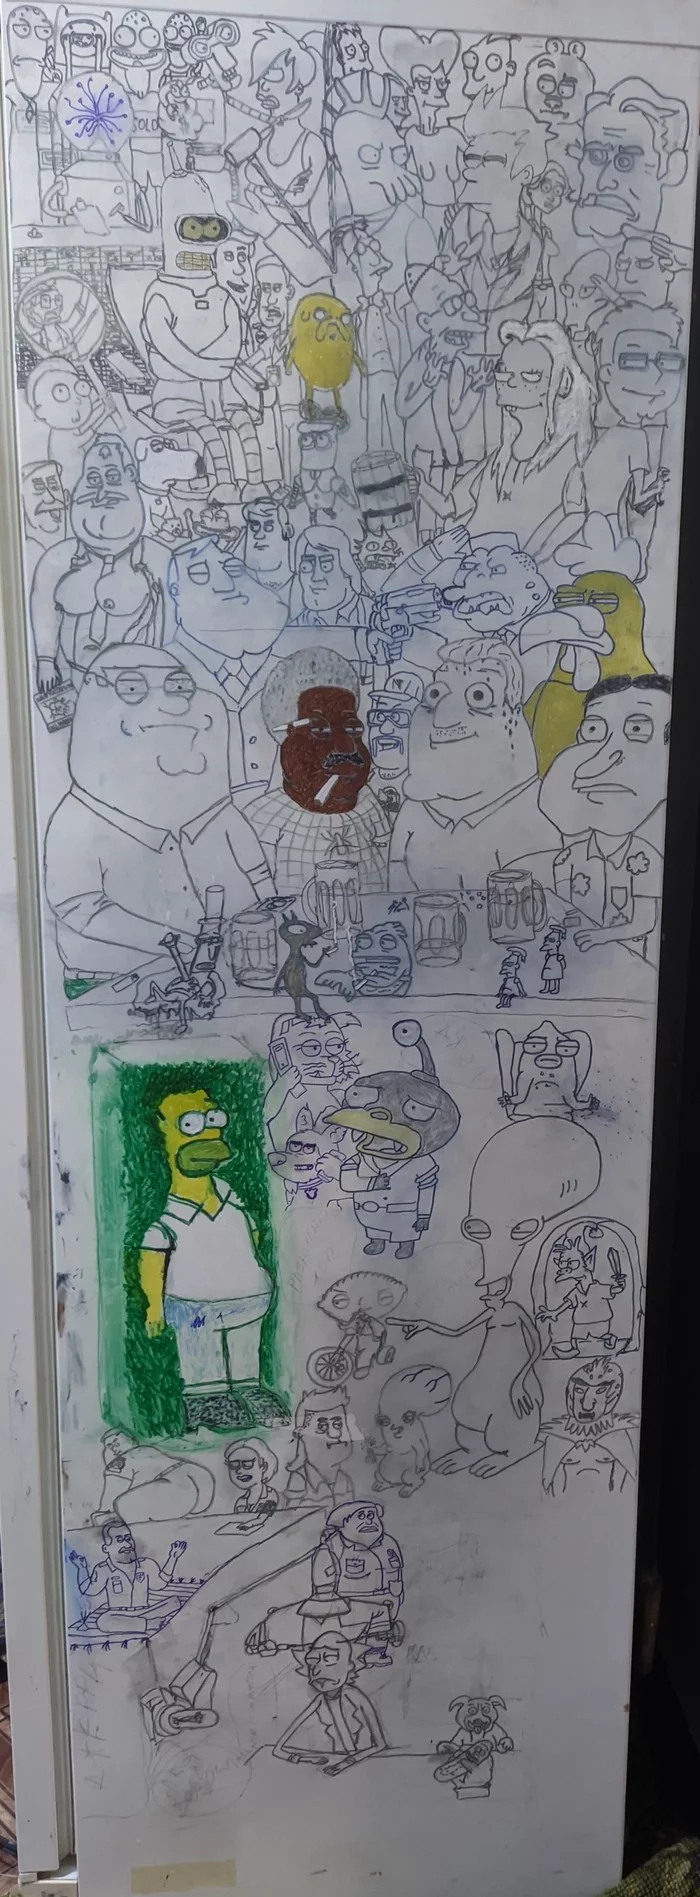 How I drew the fridge. Part 2 - My, Refrigerator, Cartoons, Strange humor, Futurama, The Simpsons, Family guy, American Daddy, Adventure Time, Solar Opposites (animated series), Disappointment (animated series), Brickleberry, Rick and Morty, Longpost